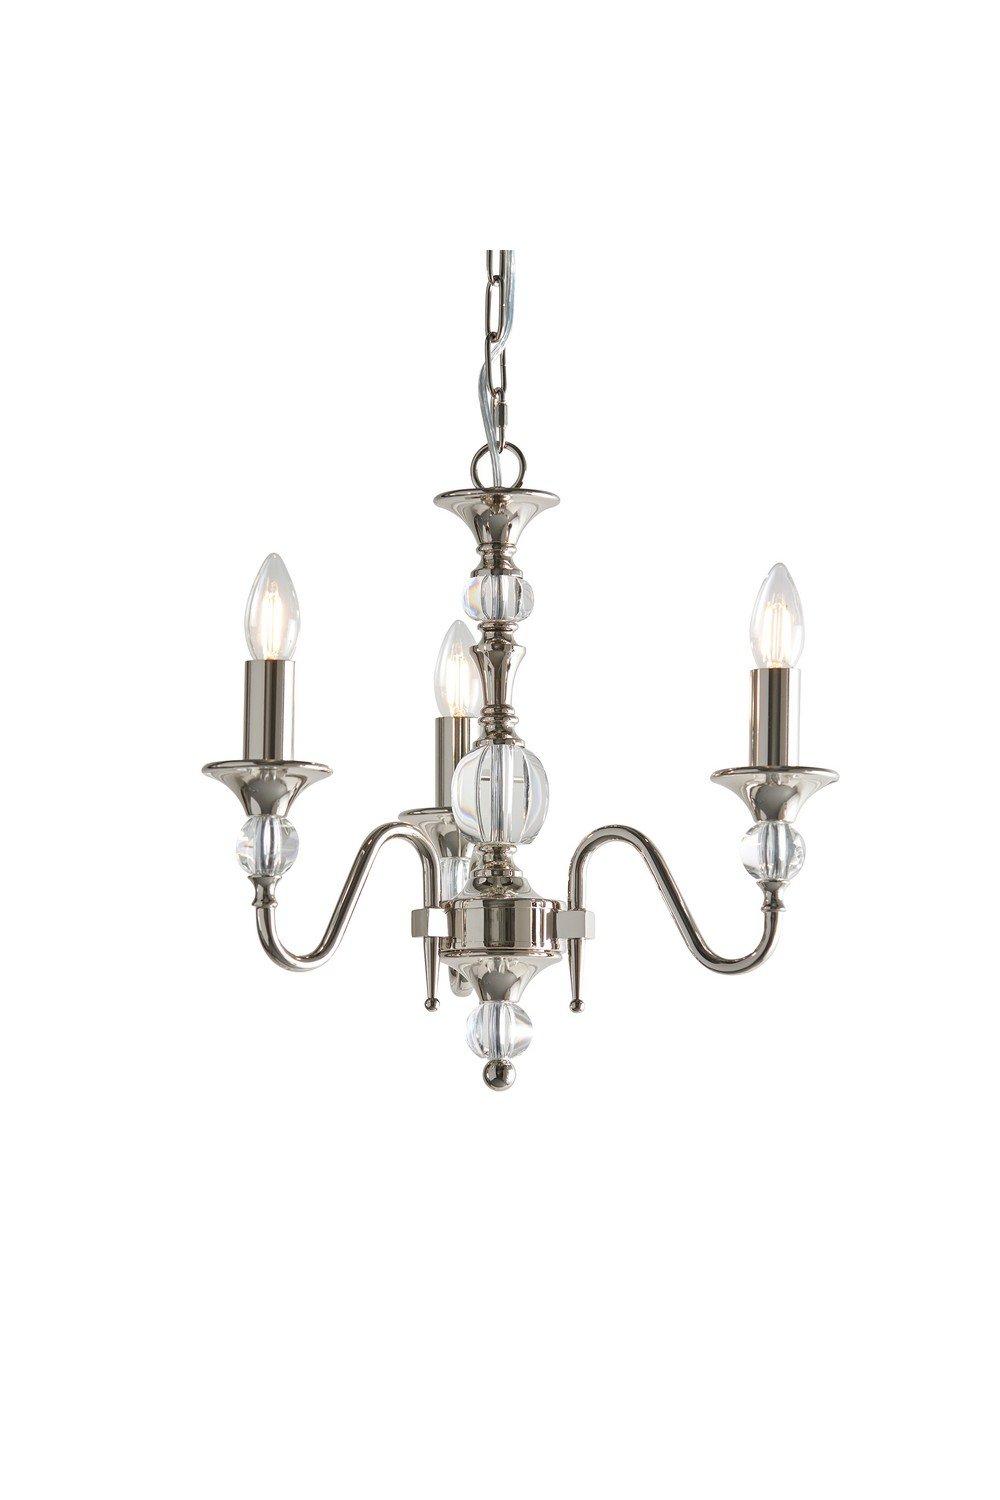 Polina 3 Light Multi Arm Ceiling Pendant Chandelier Polished Nickel Clear Crystal E14